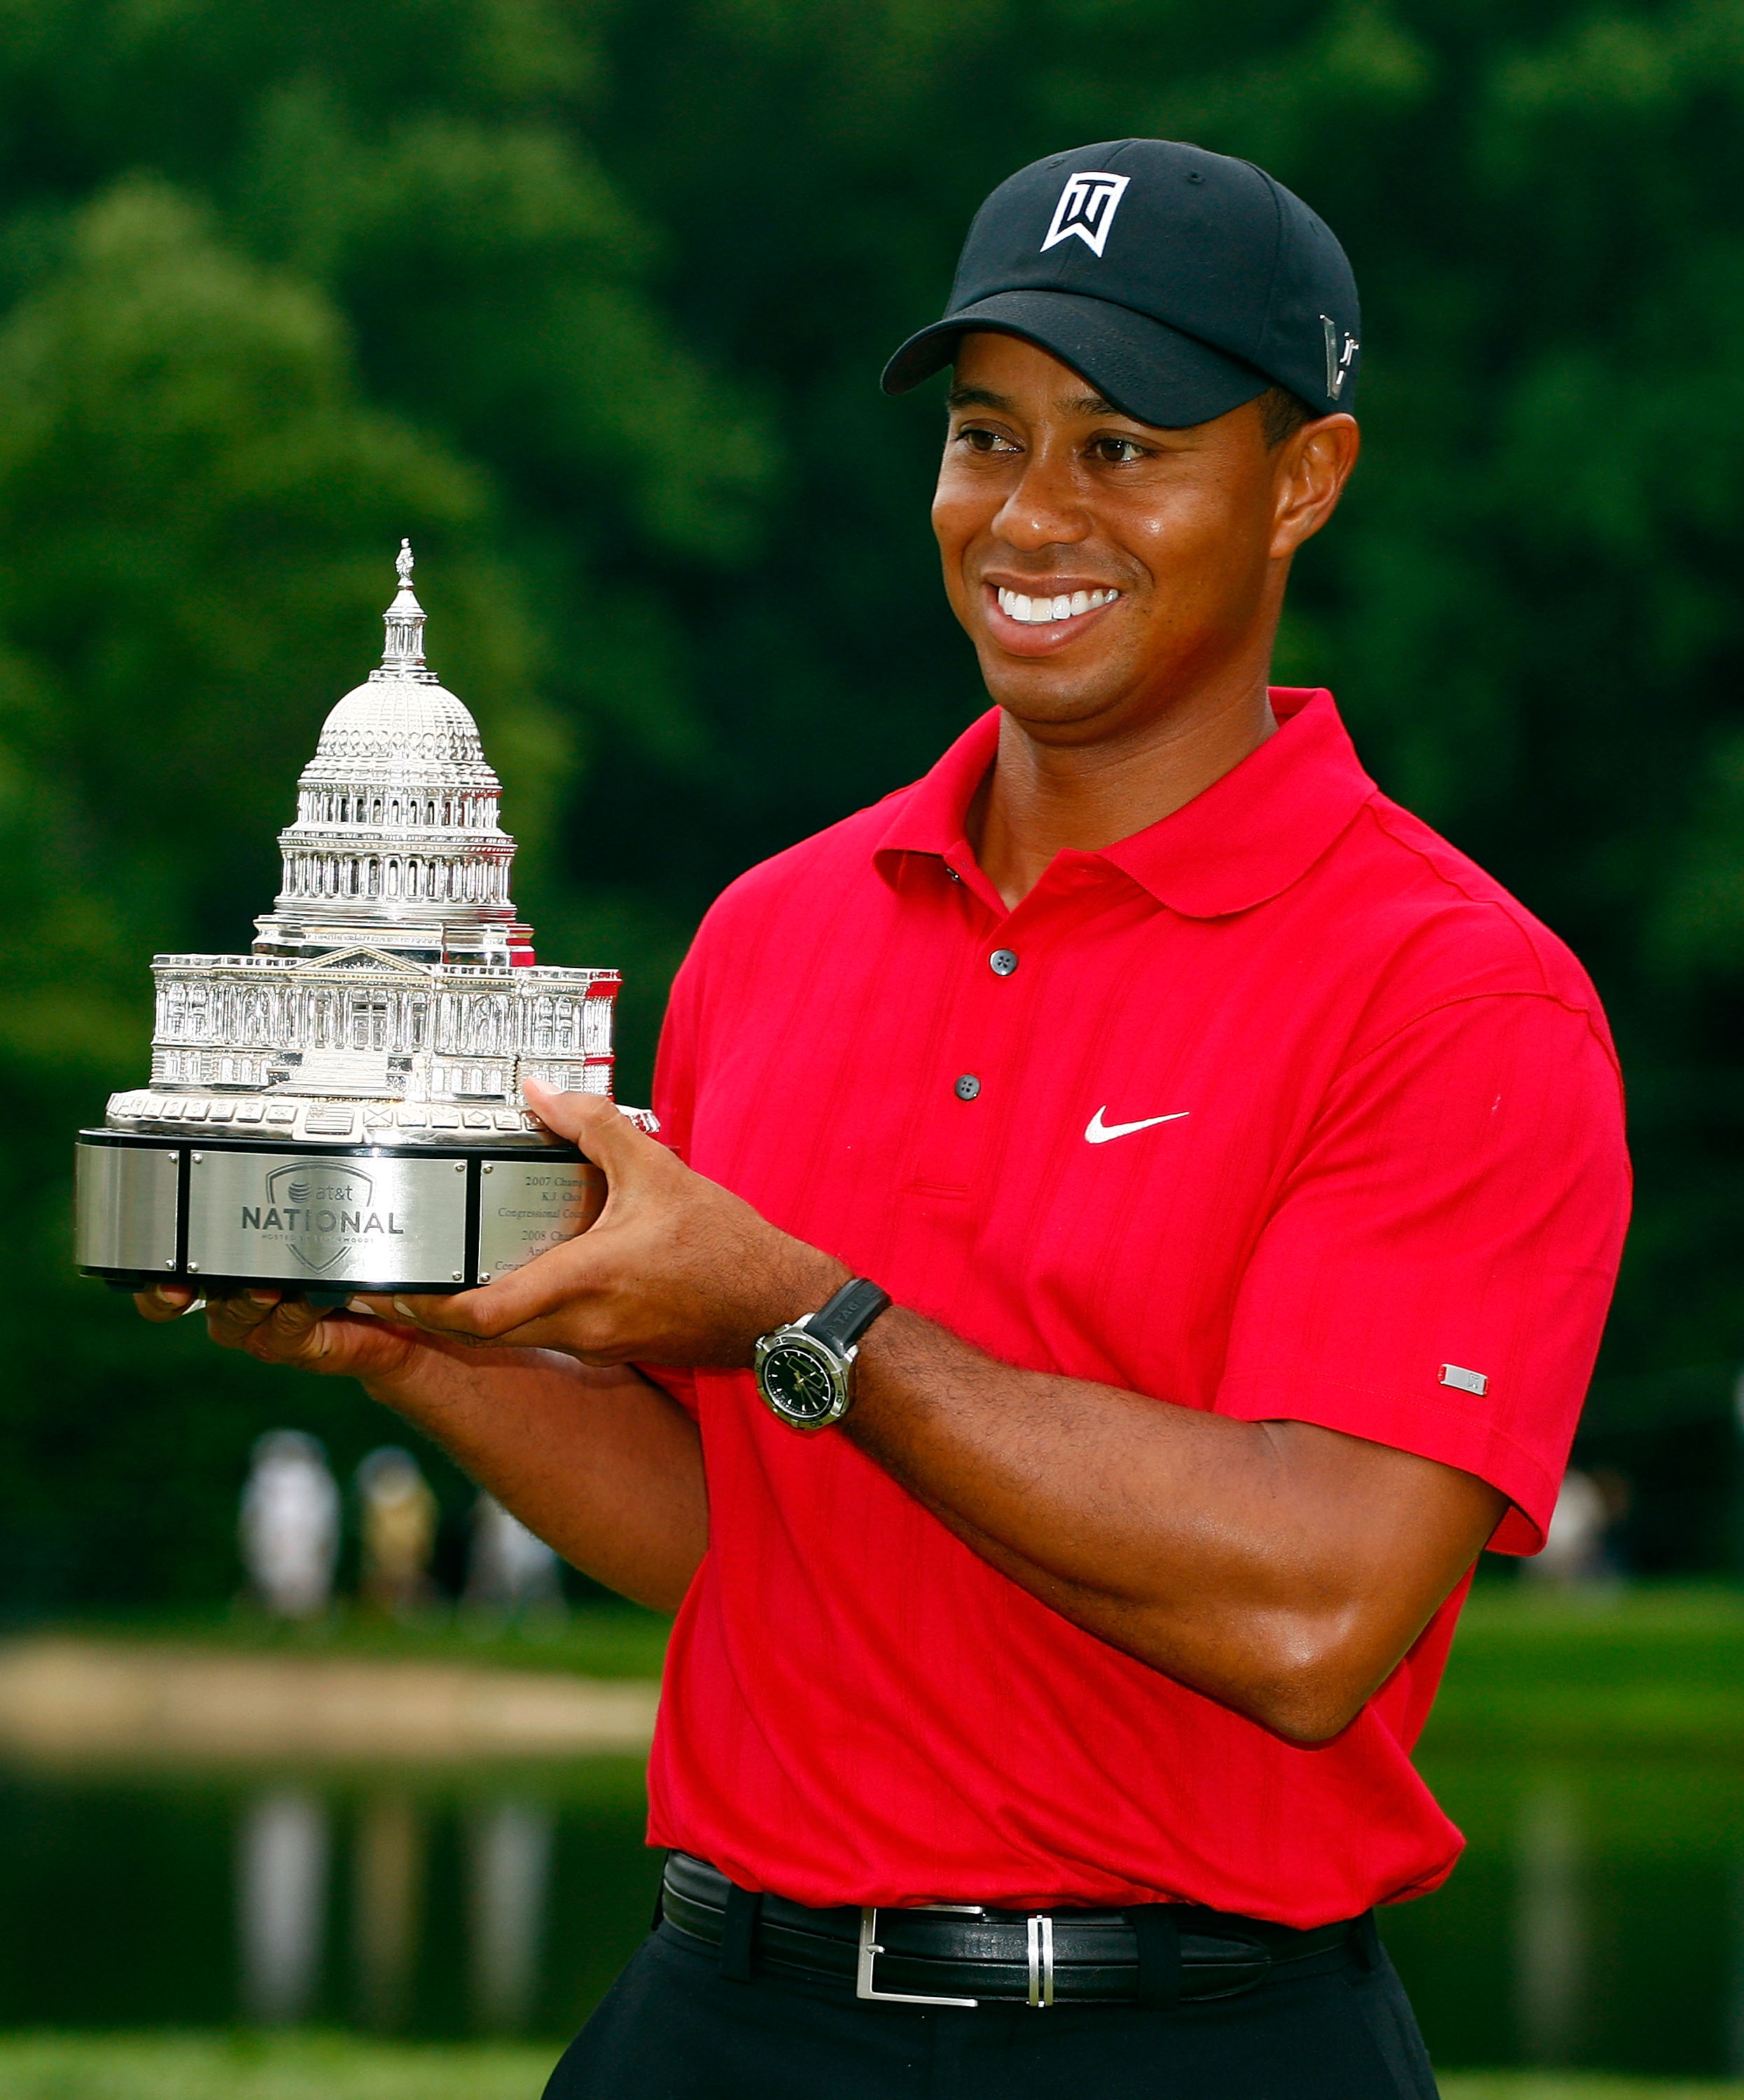 BETHESDA, MD - JULY 05:  Tiger Woods poses with the trophy after his one-stroke victory at the AT&T National at the Congressional Country Club on July 5, 2009 in Bethesda, Maryland.  (Photo by Scott Halleran/Getty Images)